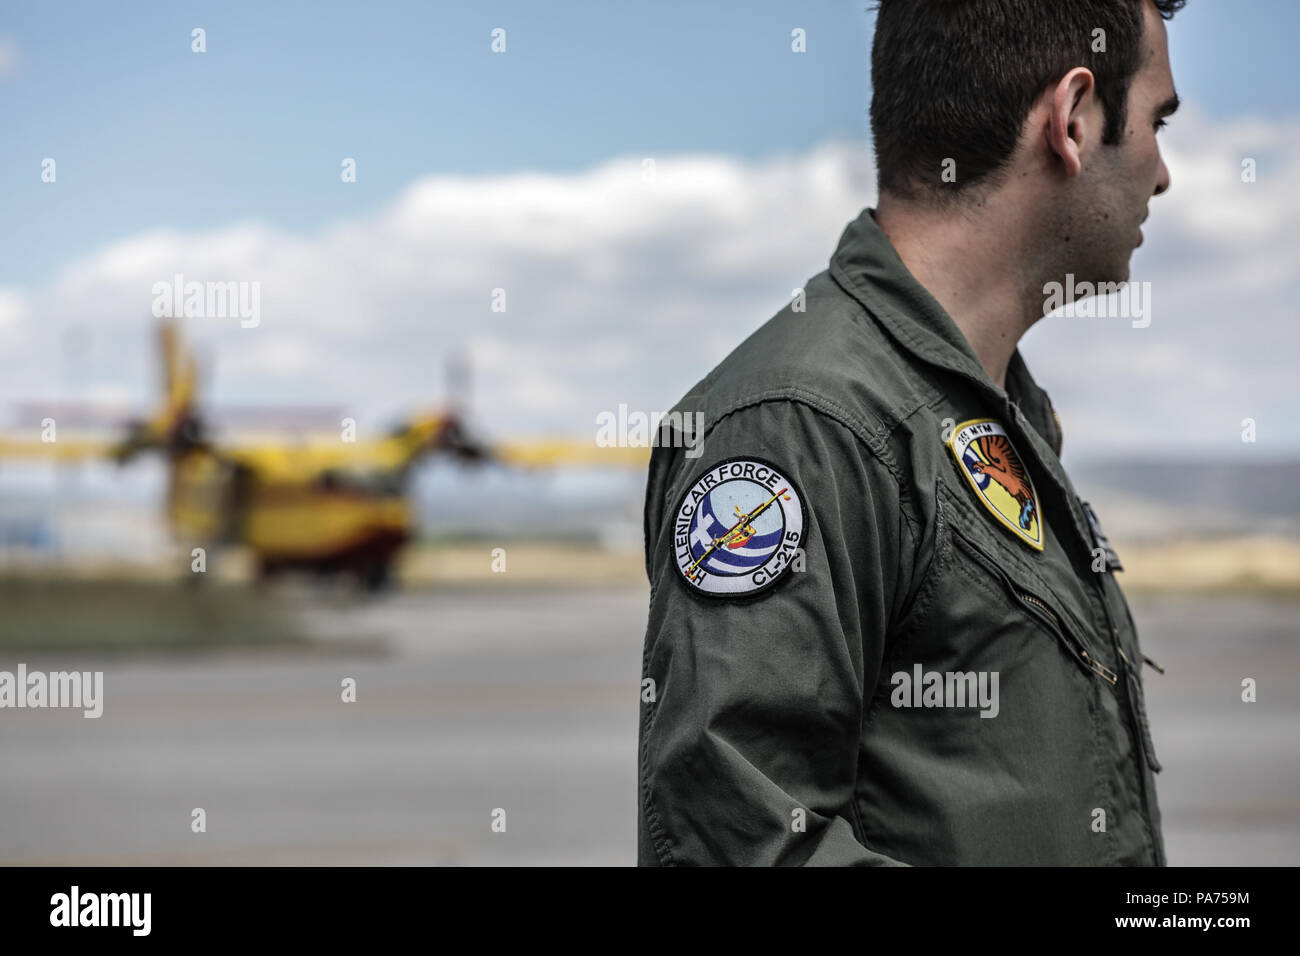 Athens. 20th July, 2018. Photo taken on July 20, 2018 shows a pilot in front of a firefighting aircraft of 355 Tactical Transport Squadron at Elefsina Air Base, Athens, Greece. The 355 Tactical Transport Squadron was established in 1947 to fight wildfires. Credit: Lefteris Partsalis/Xinhua/Alamy Live News Stock Photo